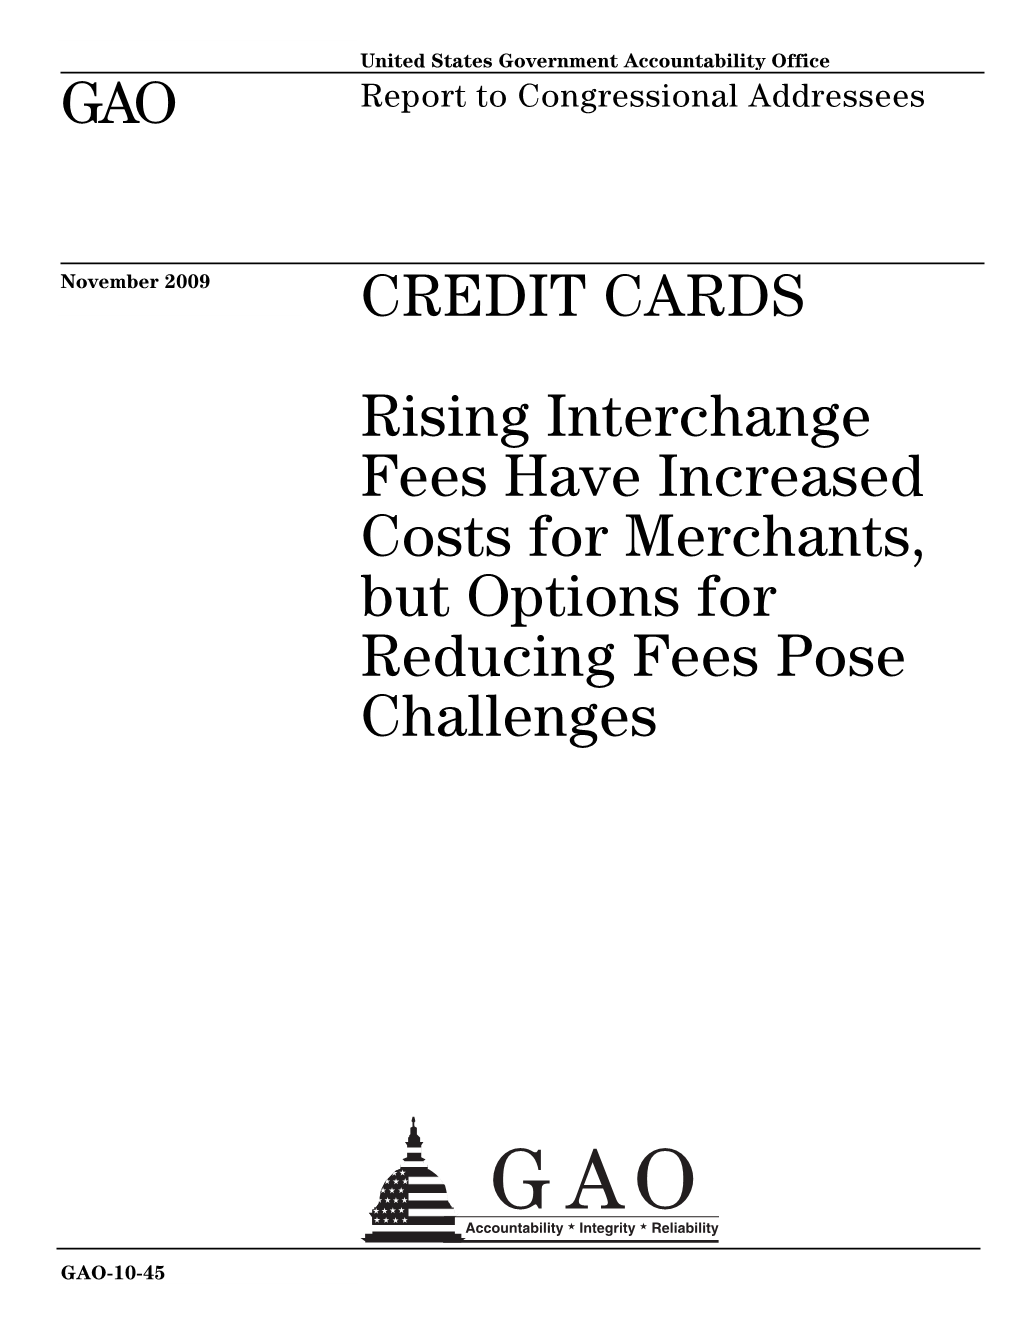 GAO-10-45 Credit Cards: Rising Interchange Fees Have Increased